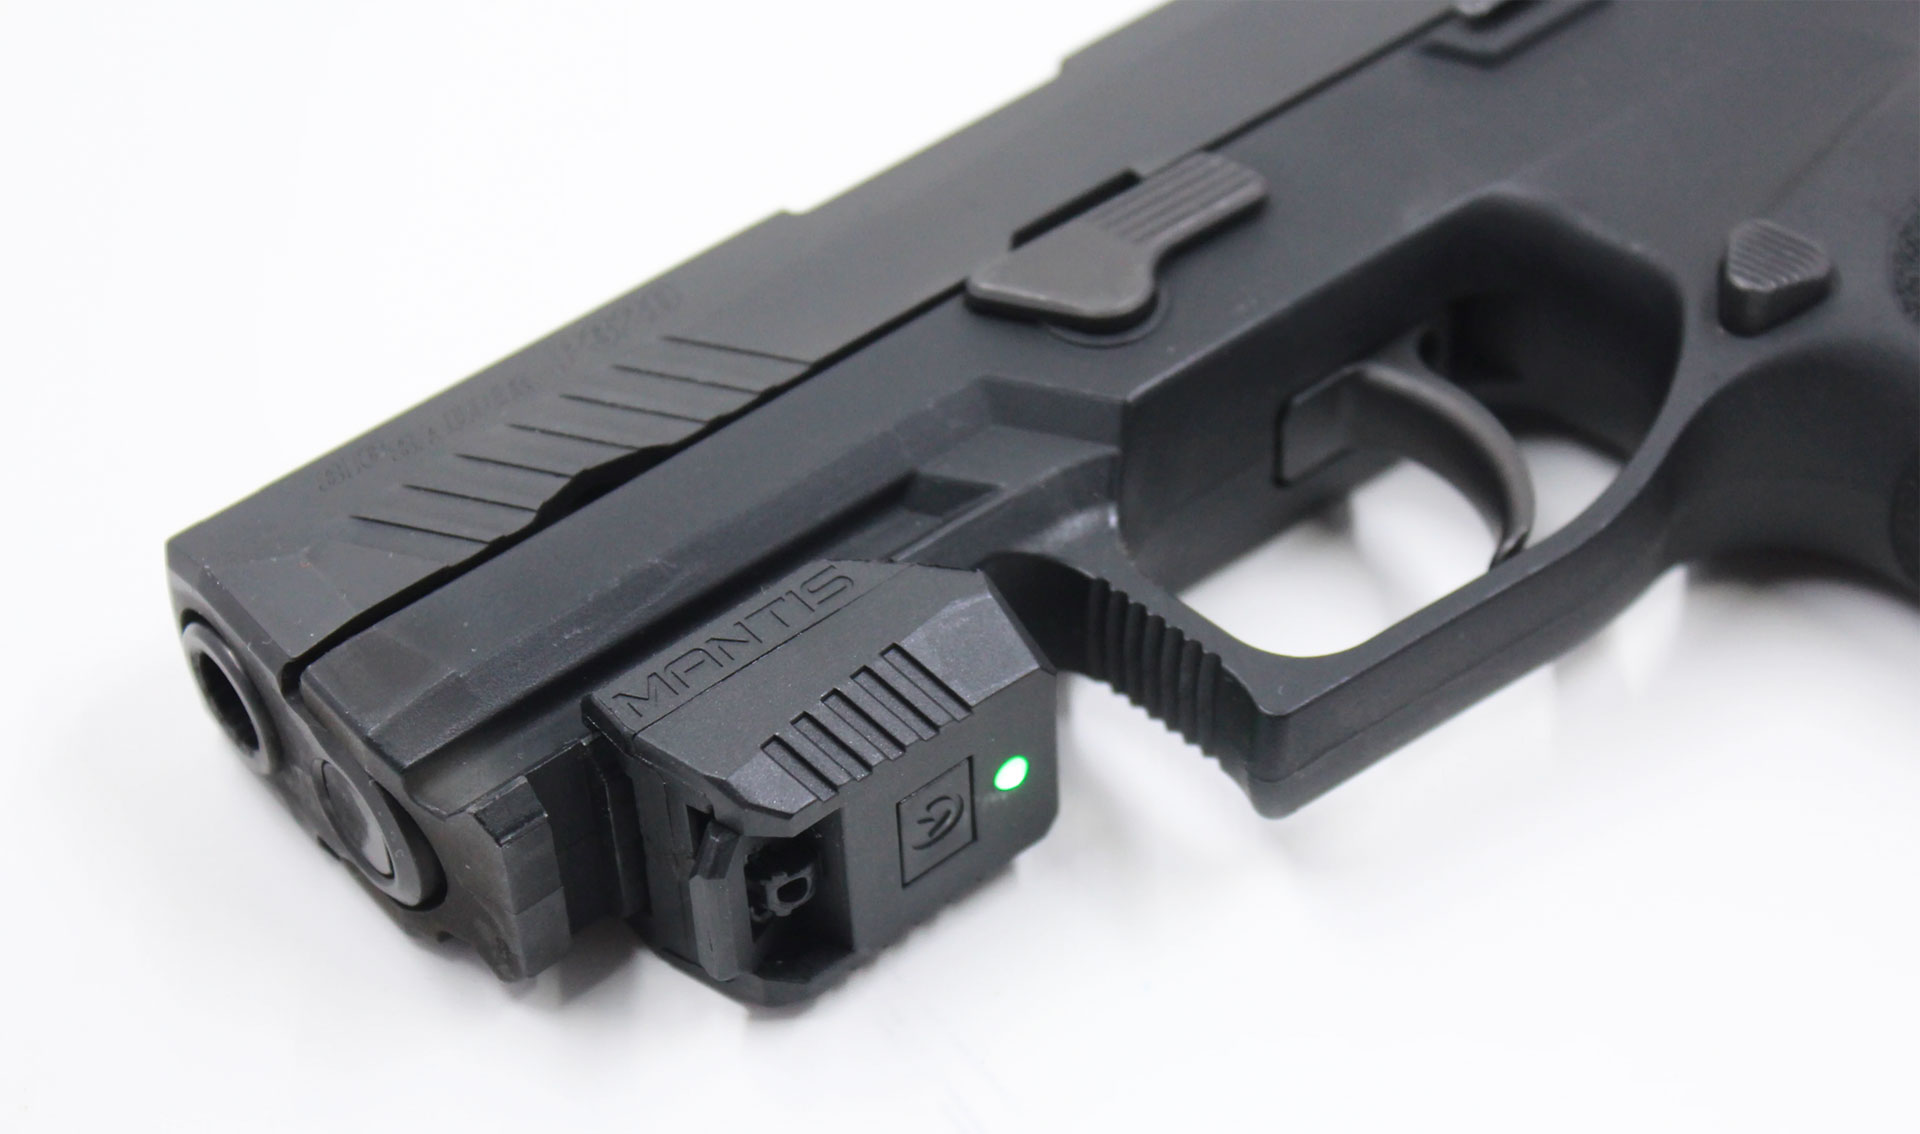 One of the Mantis laser training modules, the X3, attached to the Picatinny rail of a SIG Sauer P320.